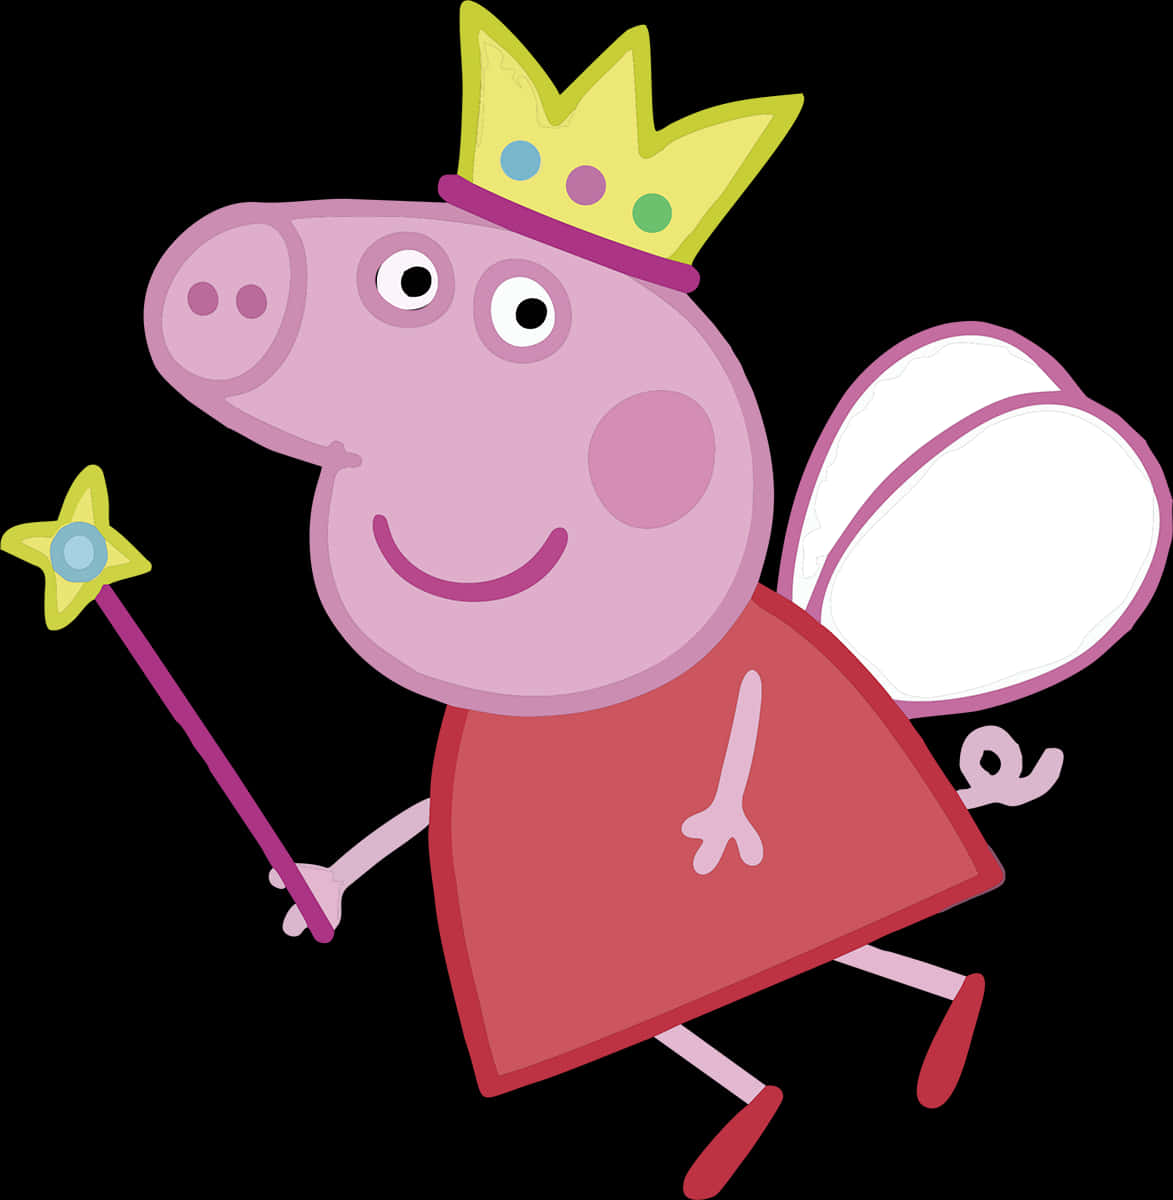 A Cartoon Pig Wearing A Crown And Holding A Magic Wand